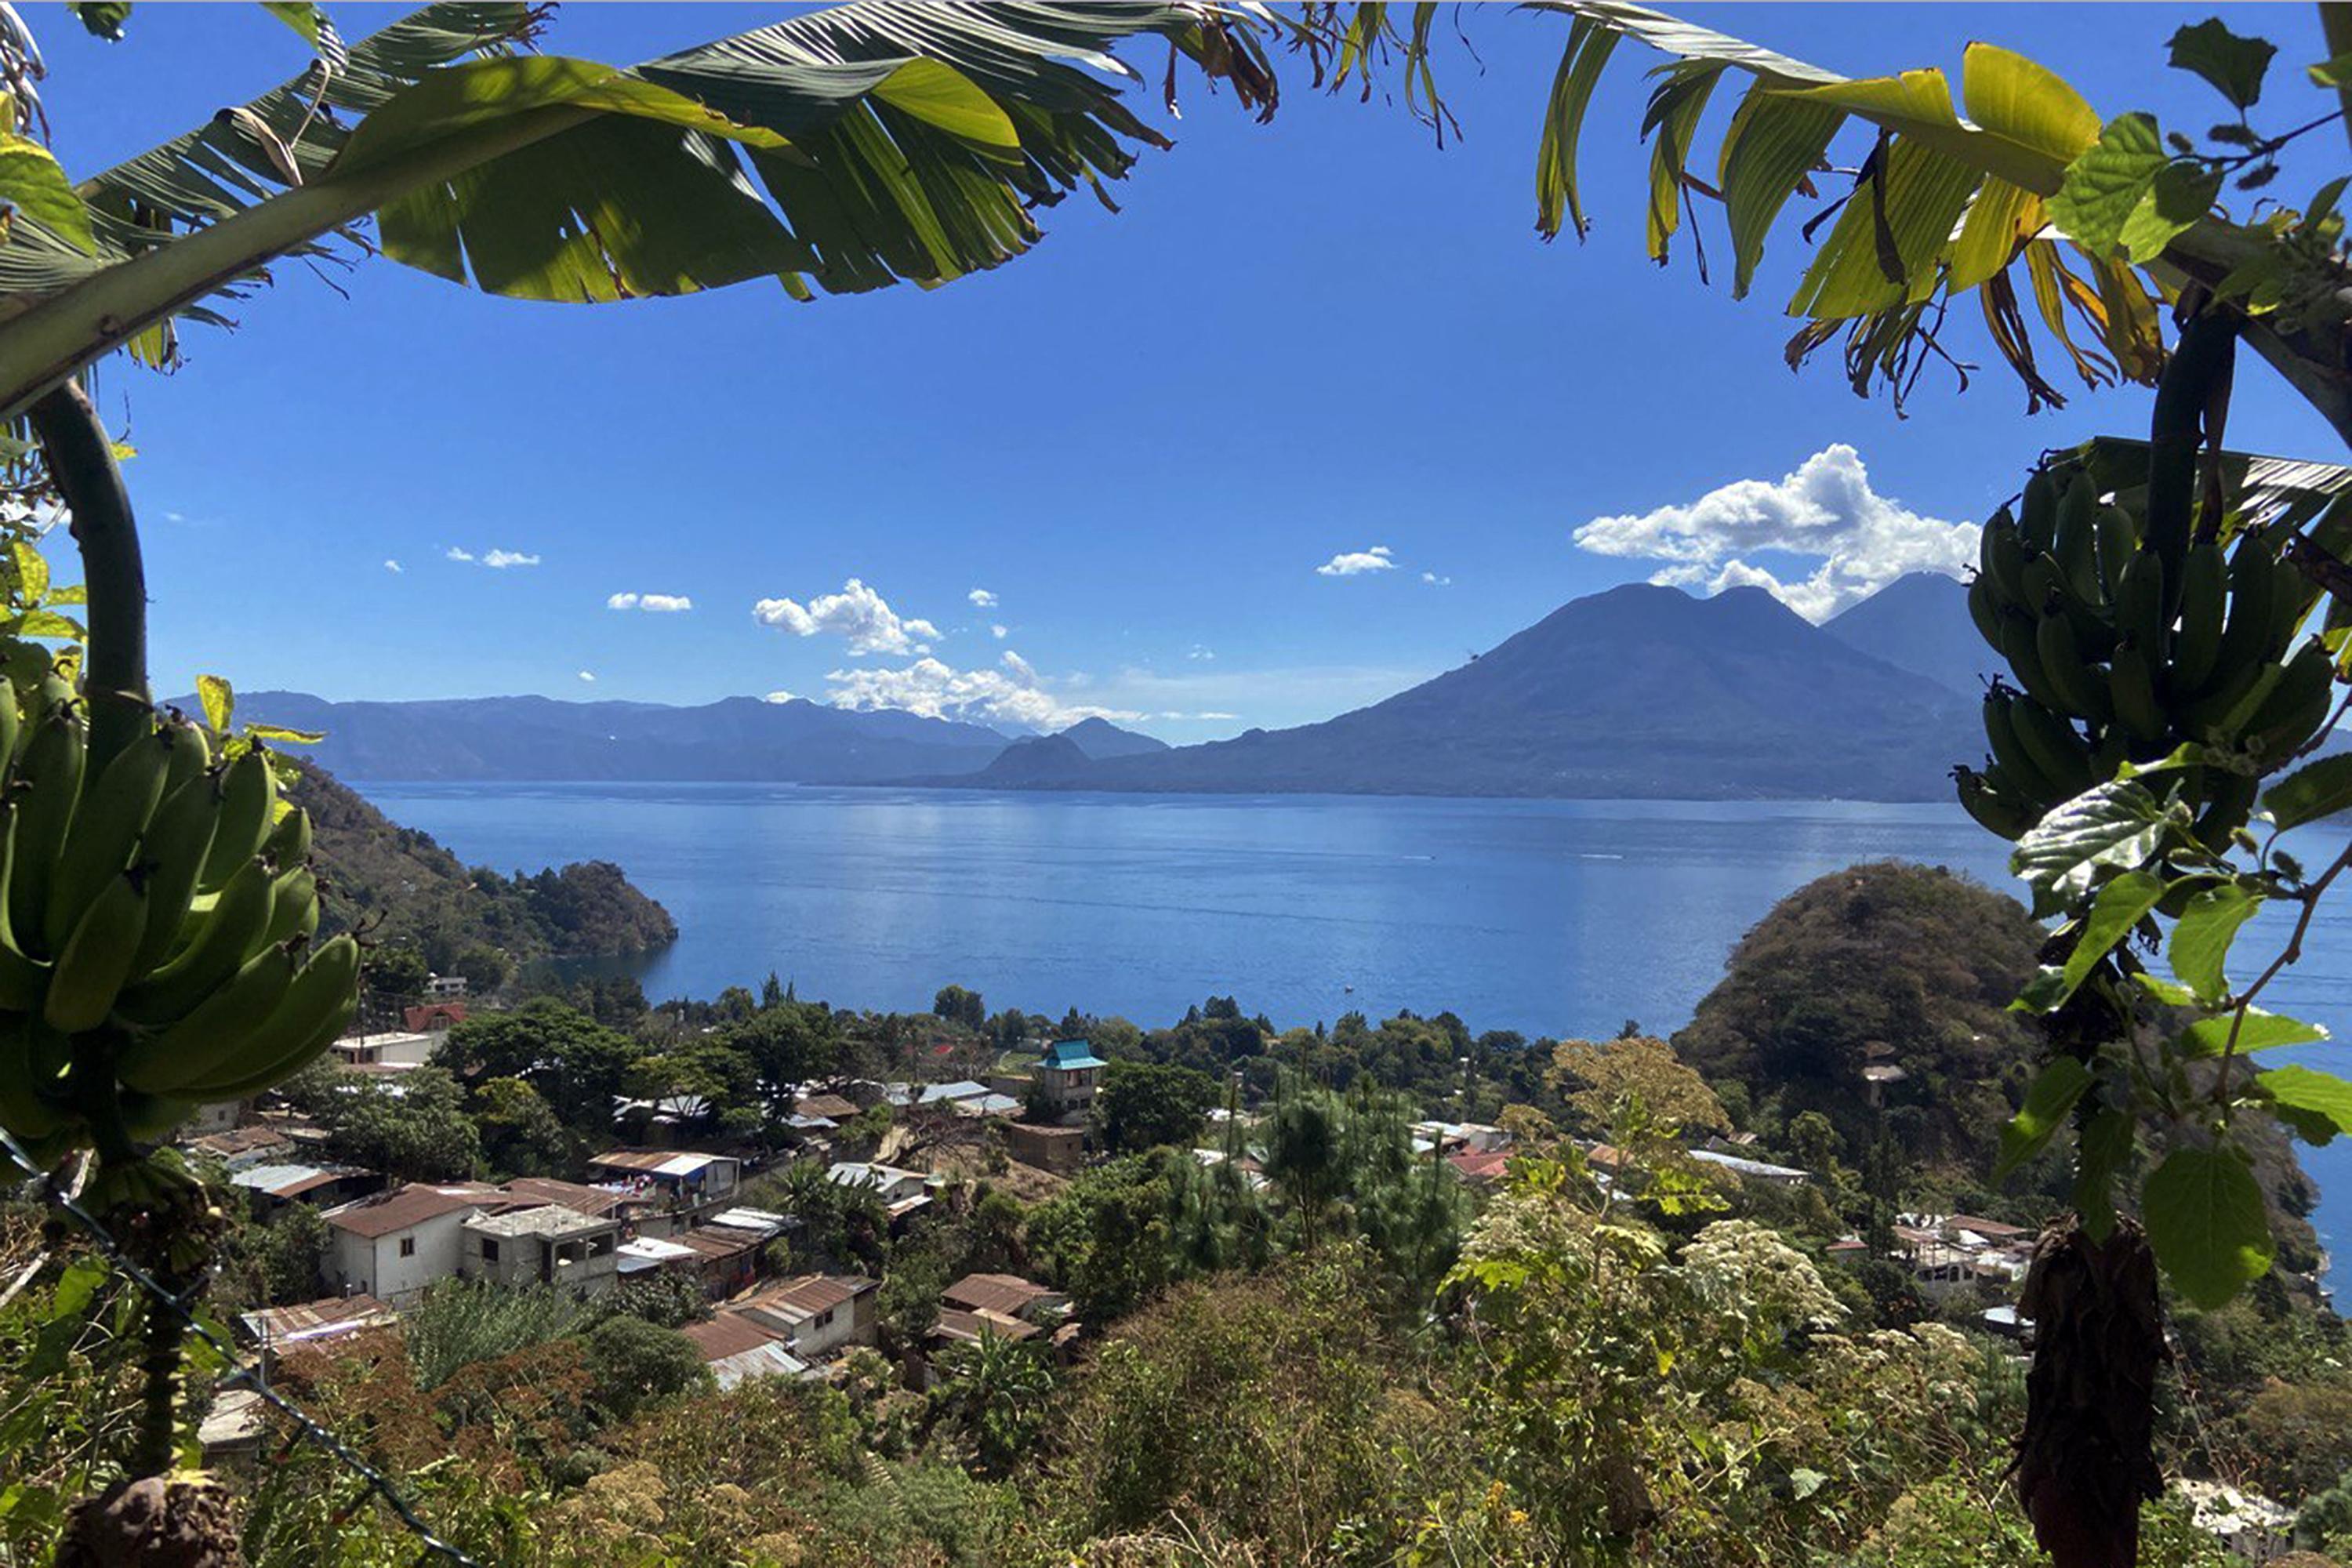 View of Lake Atitlán from Barrio 2 in San Marcos La Laguna. Kaqchikel residents call the spot of this photo Tz